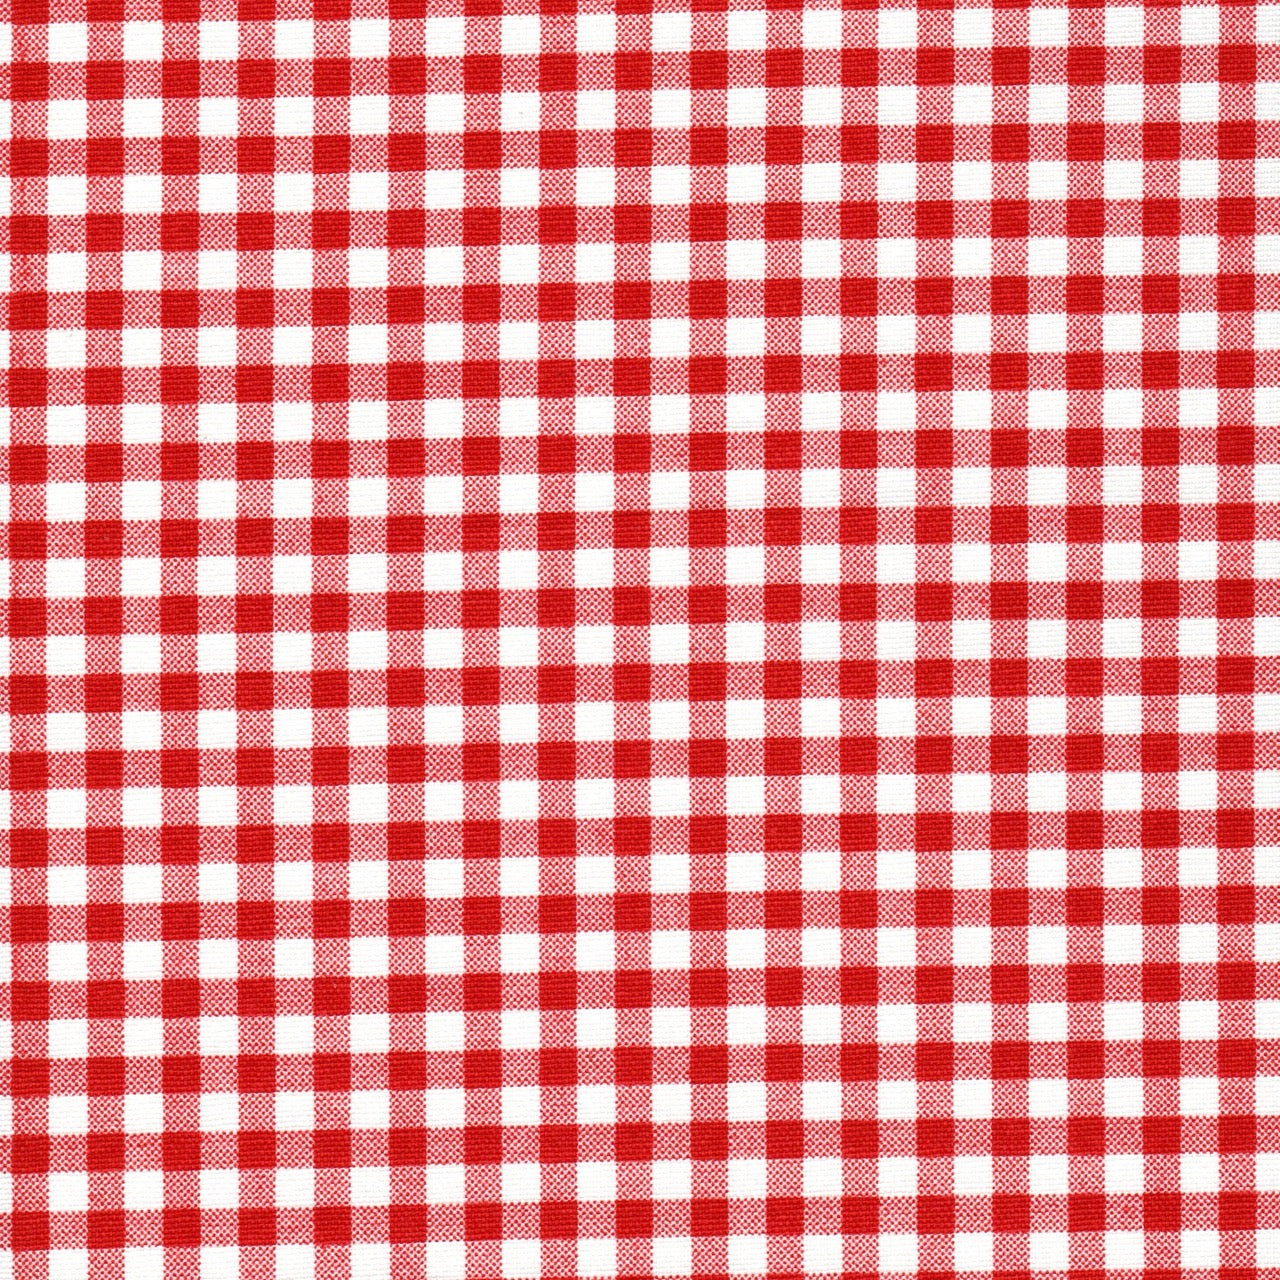 Tailored Tier Curtains in Lipstick Red Large Gingham Check on White